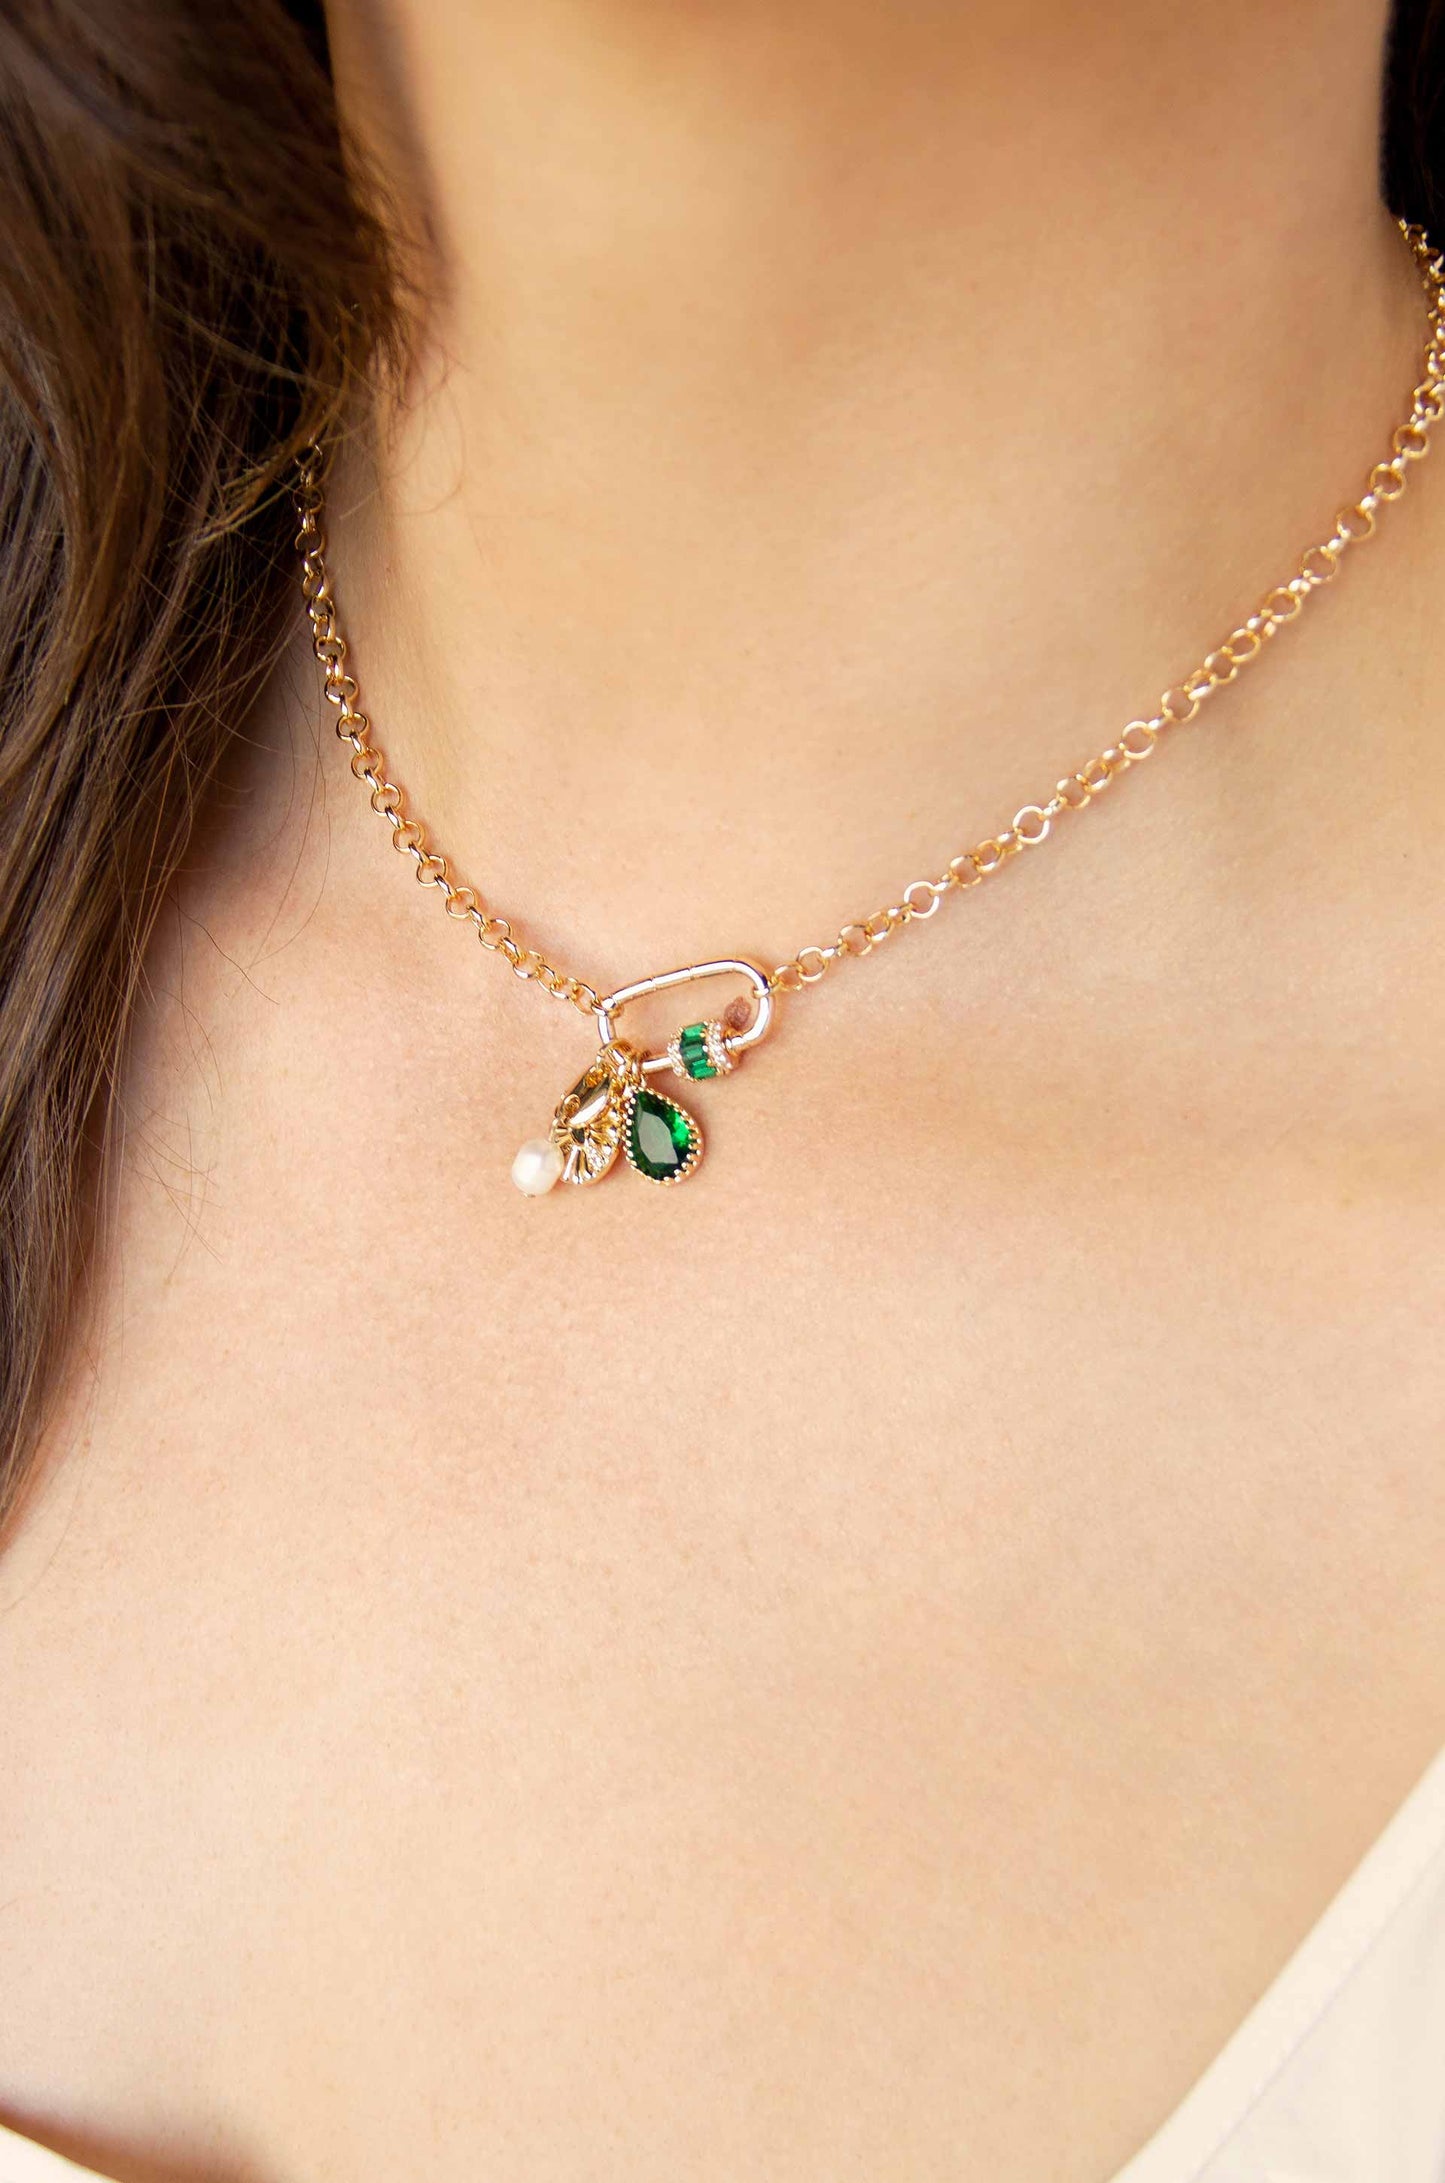 Green Queen 18k Gold Plated Crystal Charm Necklace on a model